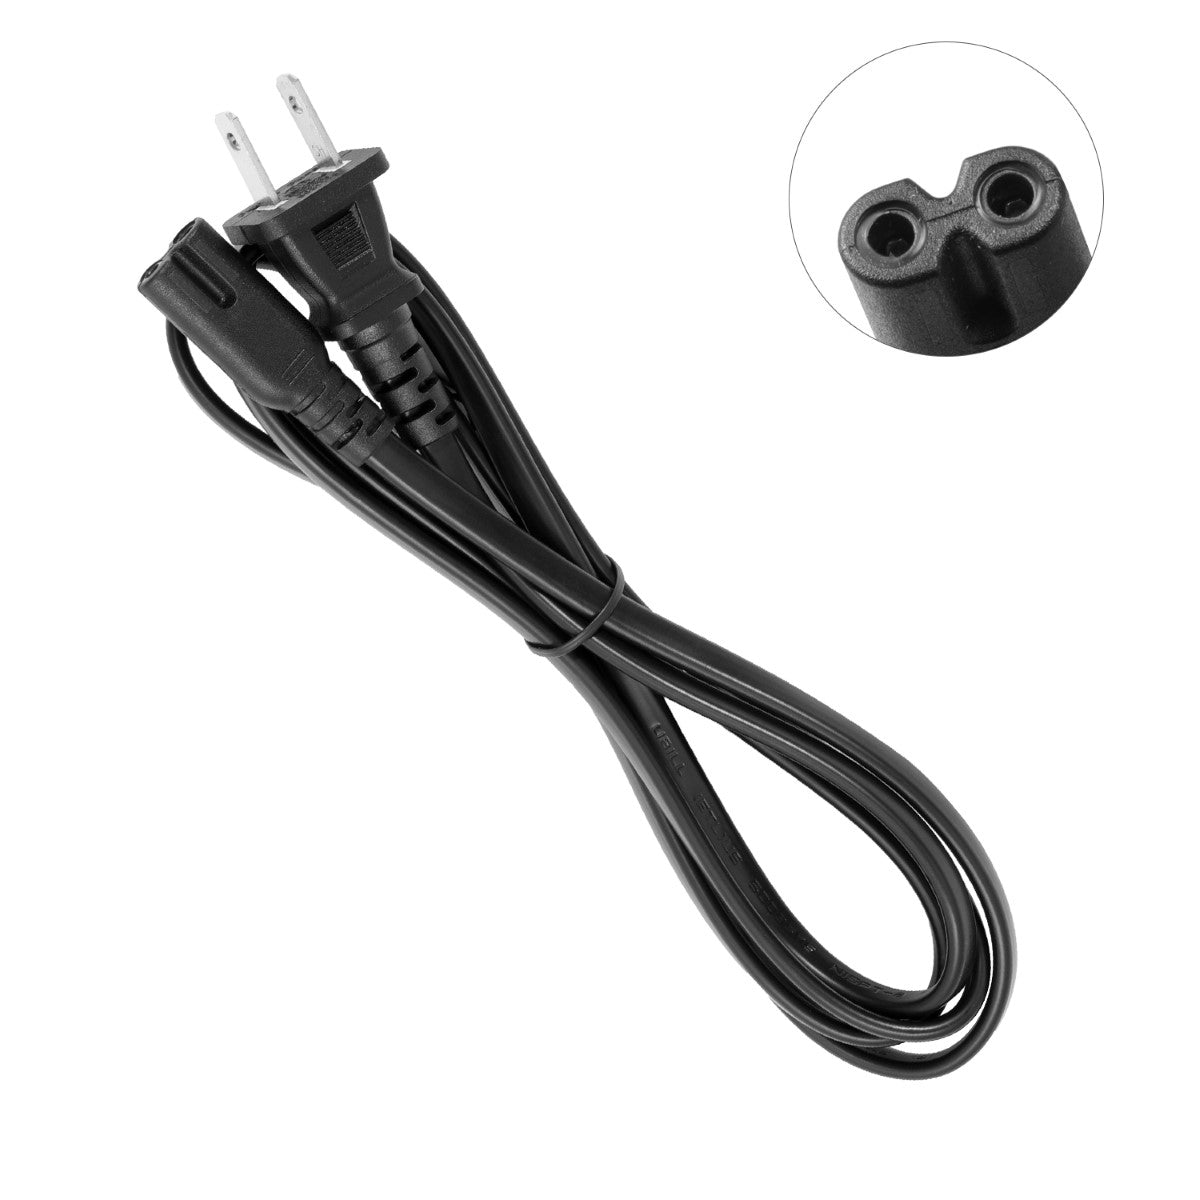 Power Cable for HP OfficeJet 9012 All-in-One Wireless Printer.